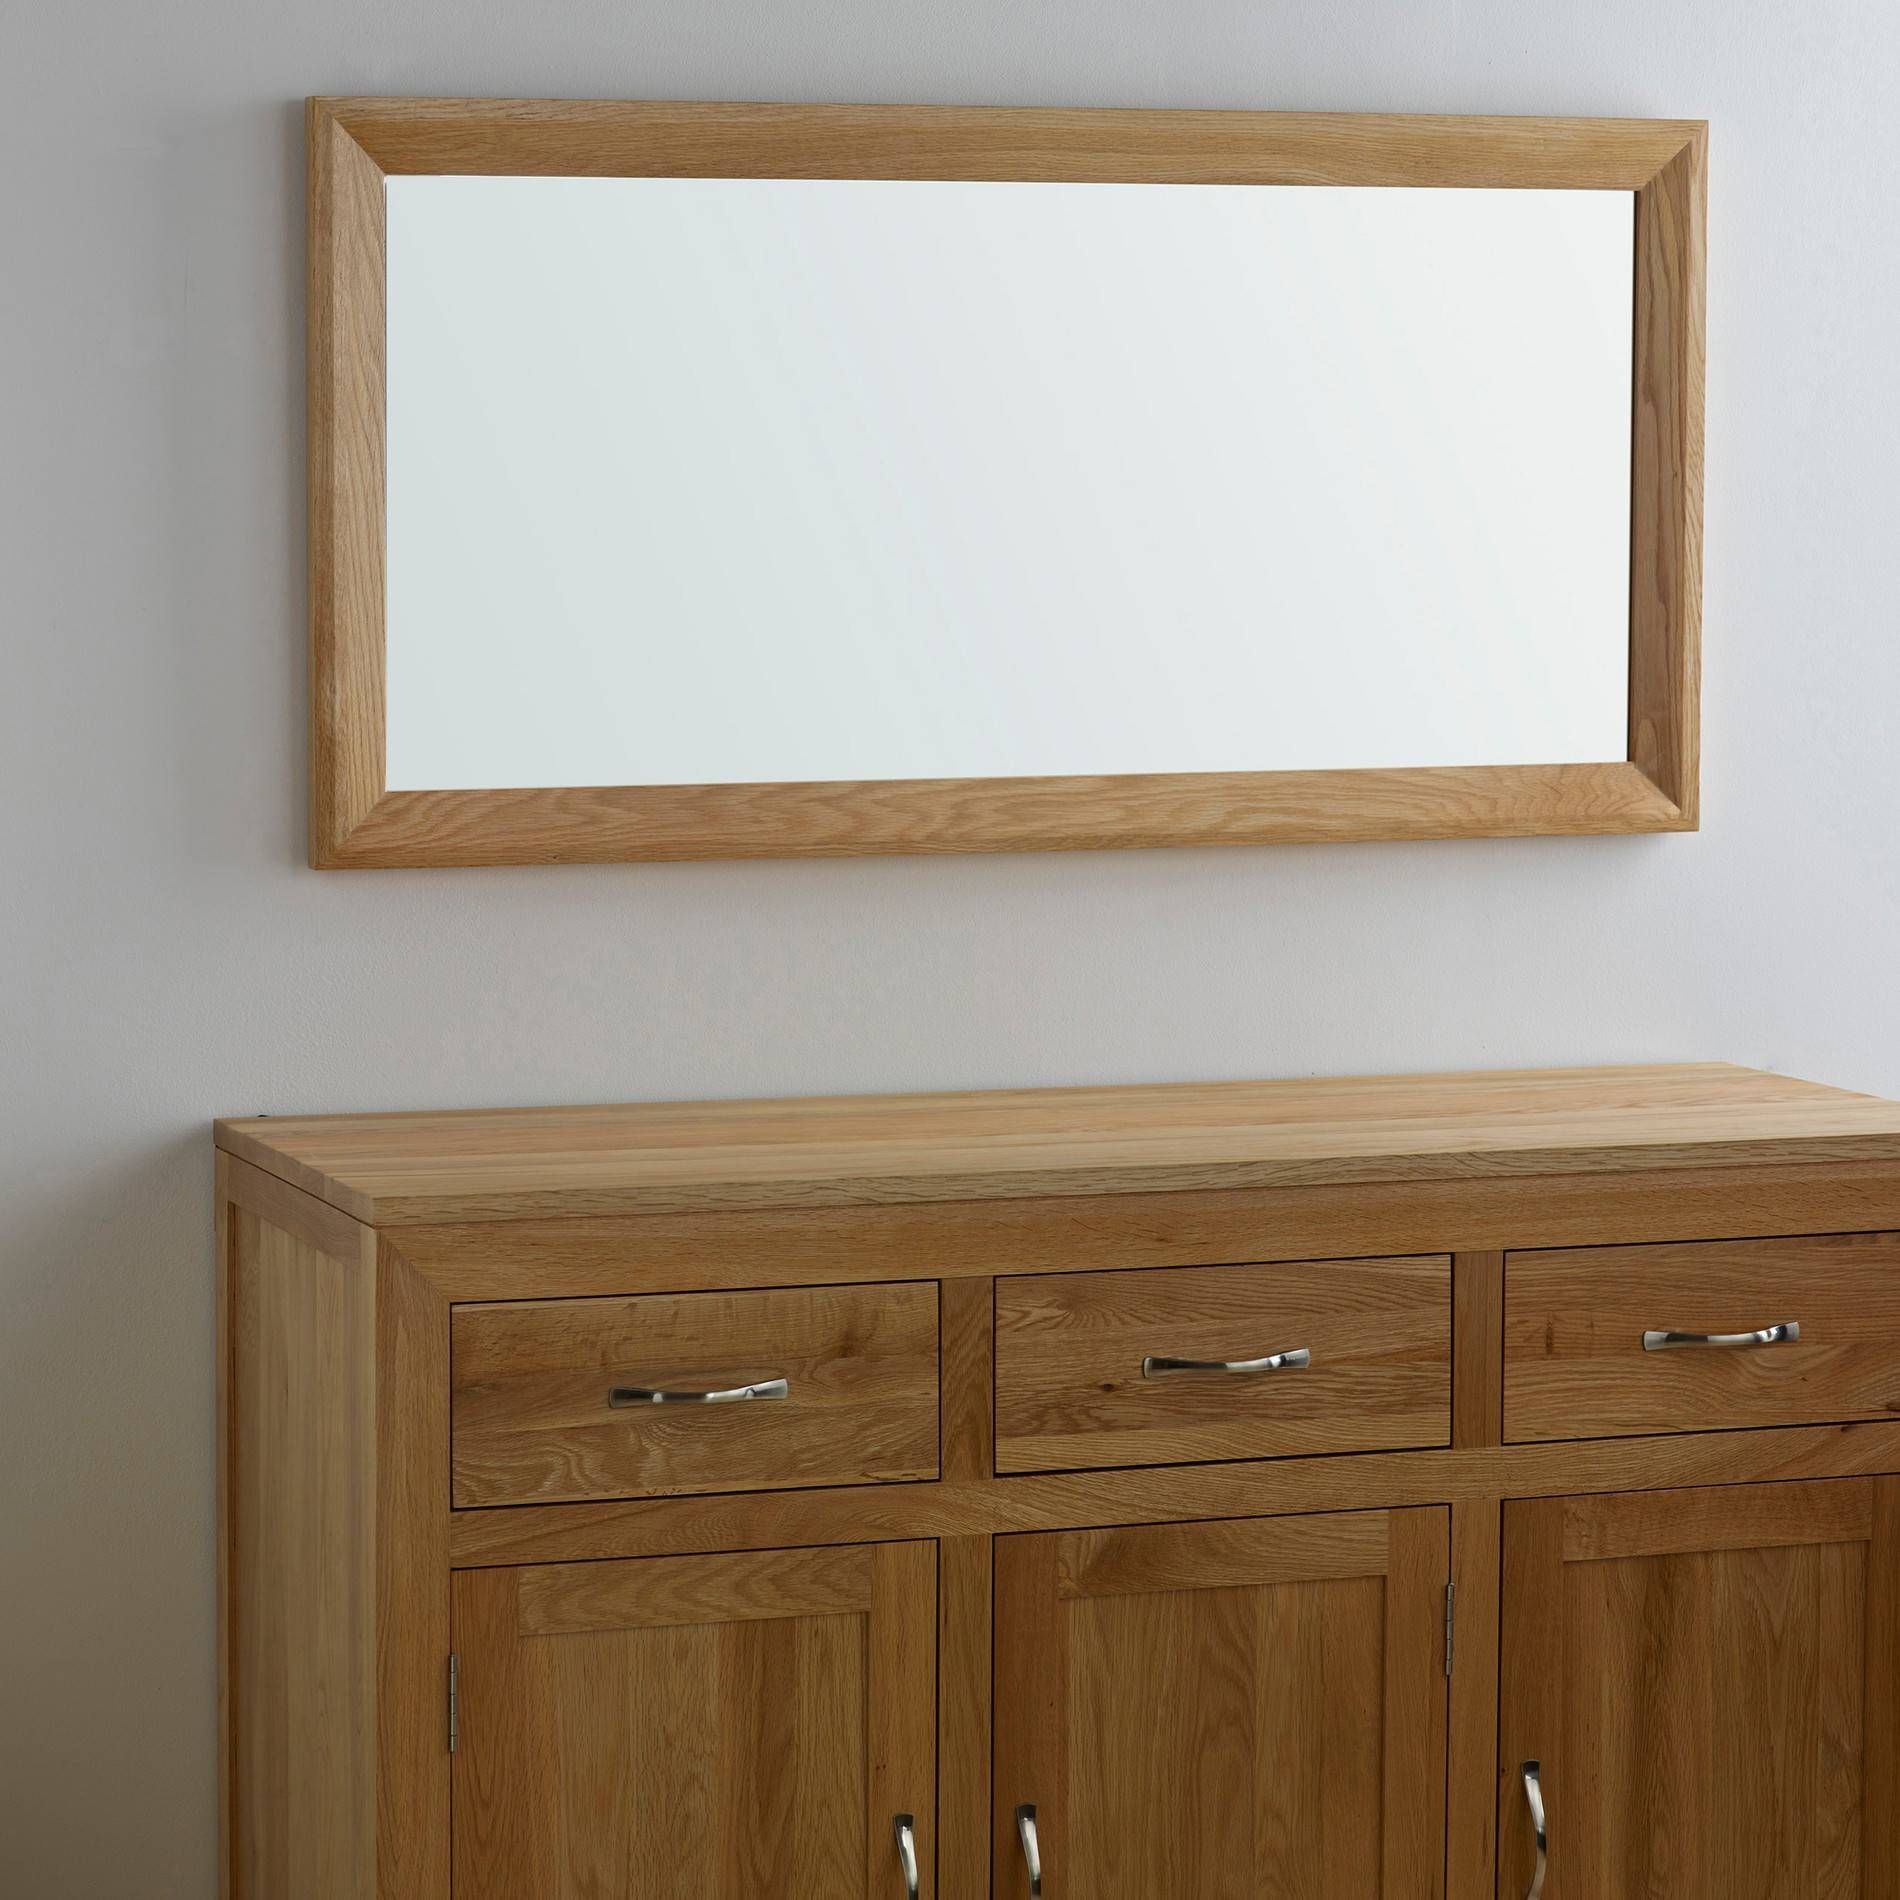 The Bevel Range – Natural Solid Oak Furniture Pertaining To Oak Mirrors (View 15 of 15)